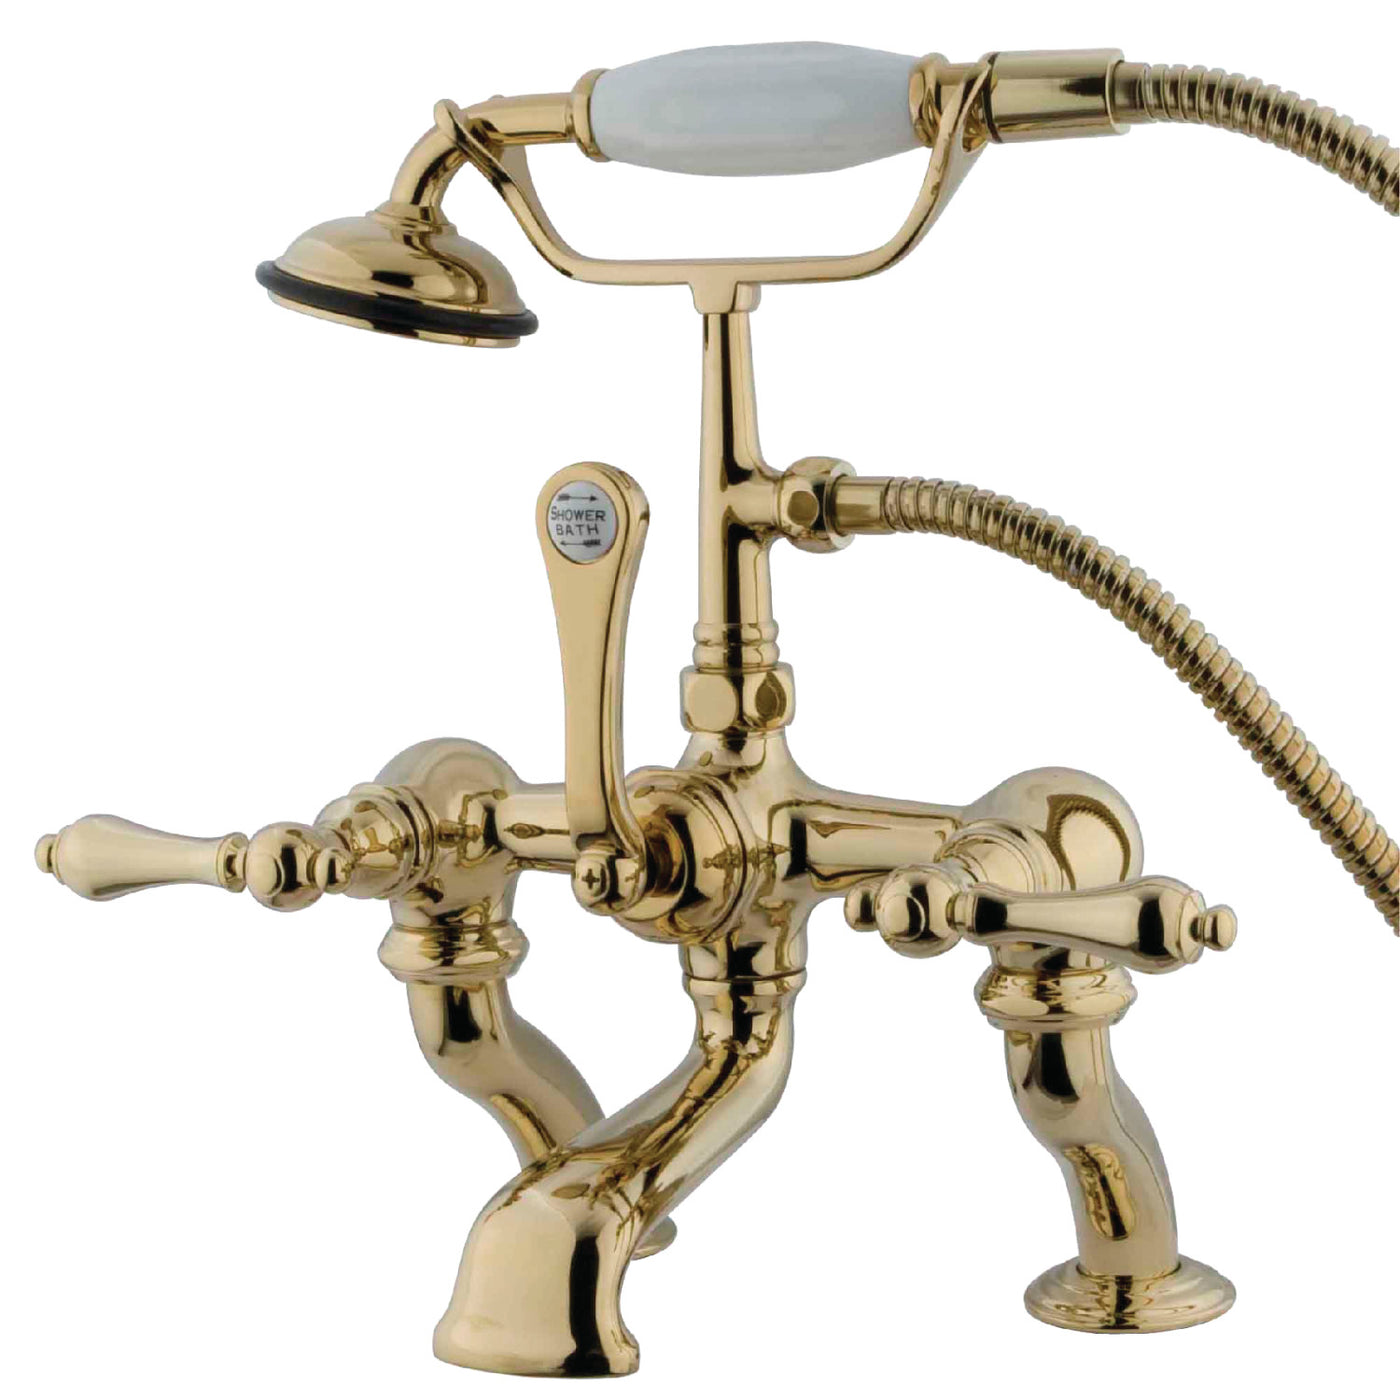 Elements of Design DT4092AL 7-Inch Deck Mount Tub Faucet with Hand Shower, Polished Brass